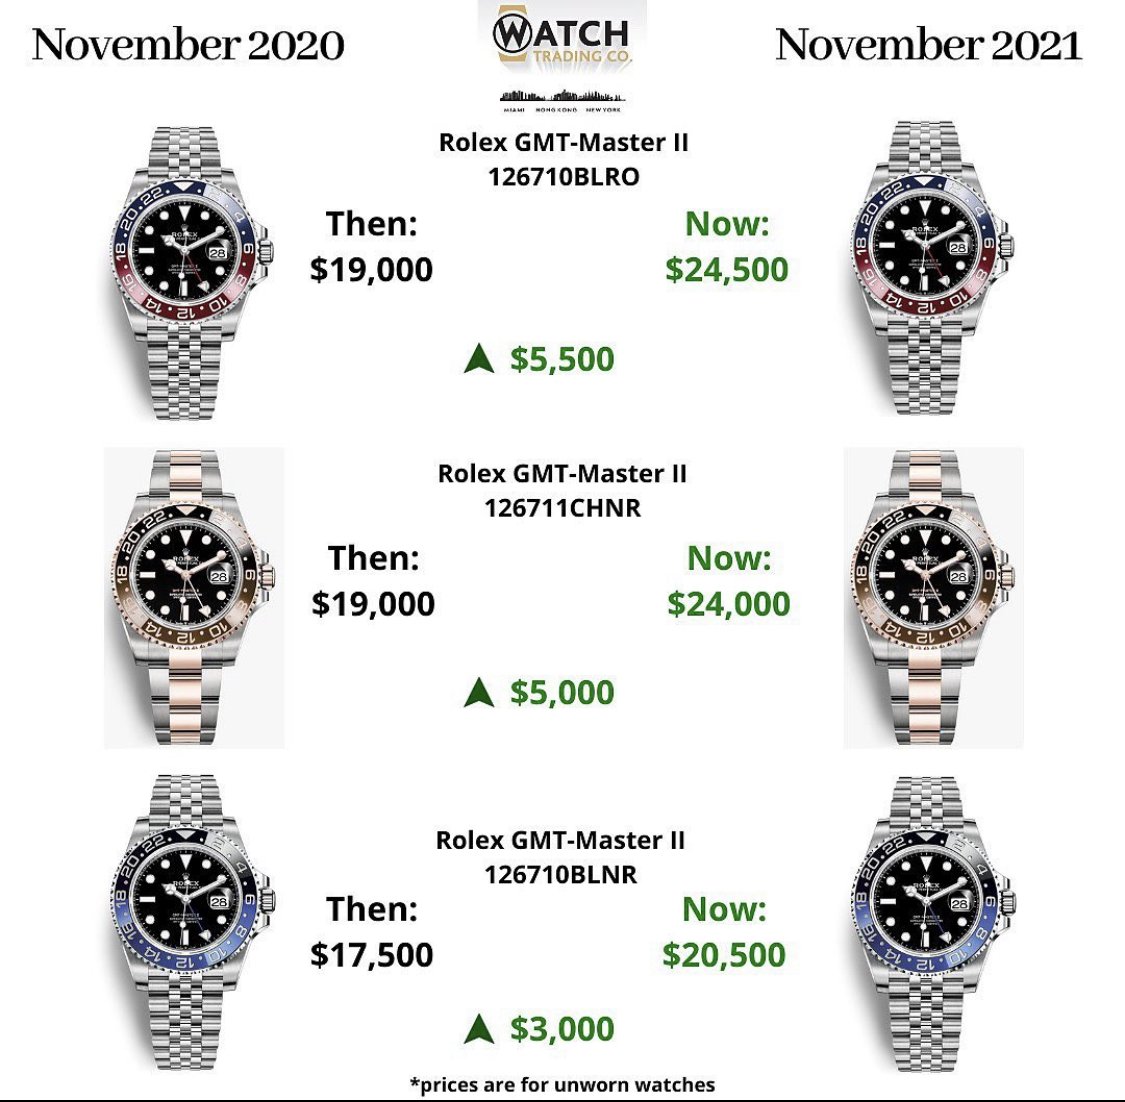 Rolex Watches Good Investment? According to the Data, the Answer is a Resounding, YES! — Wrist Enthusiast